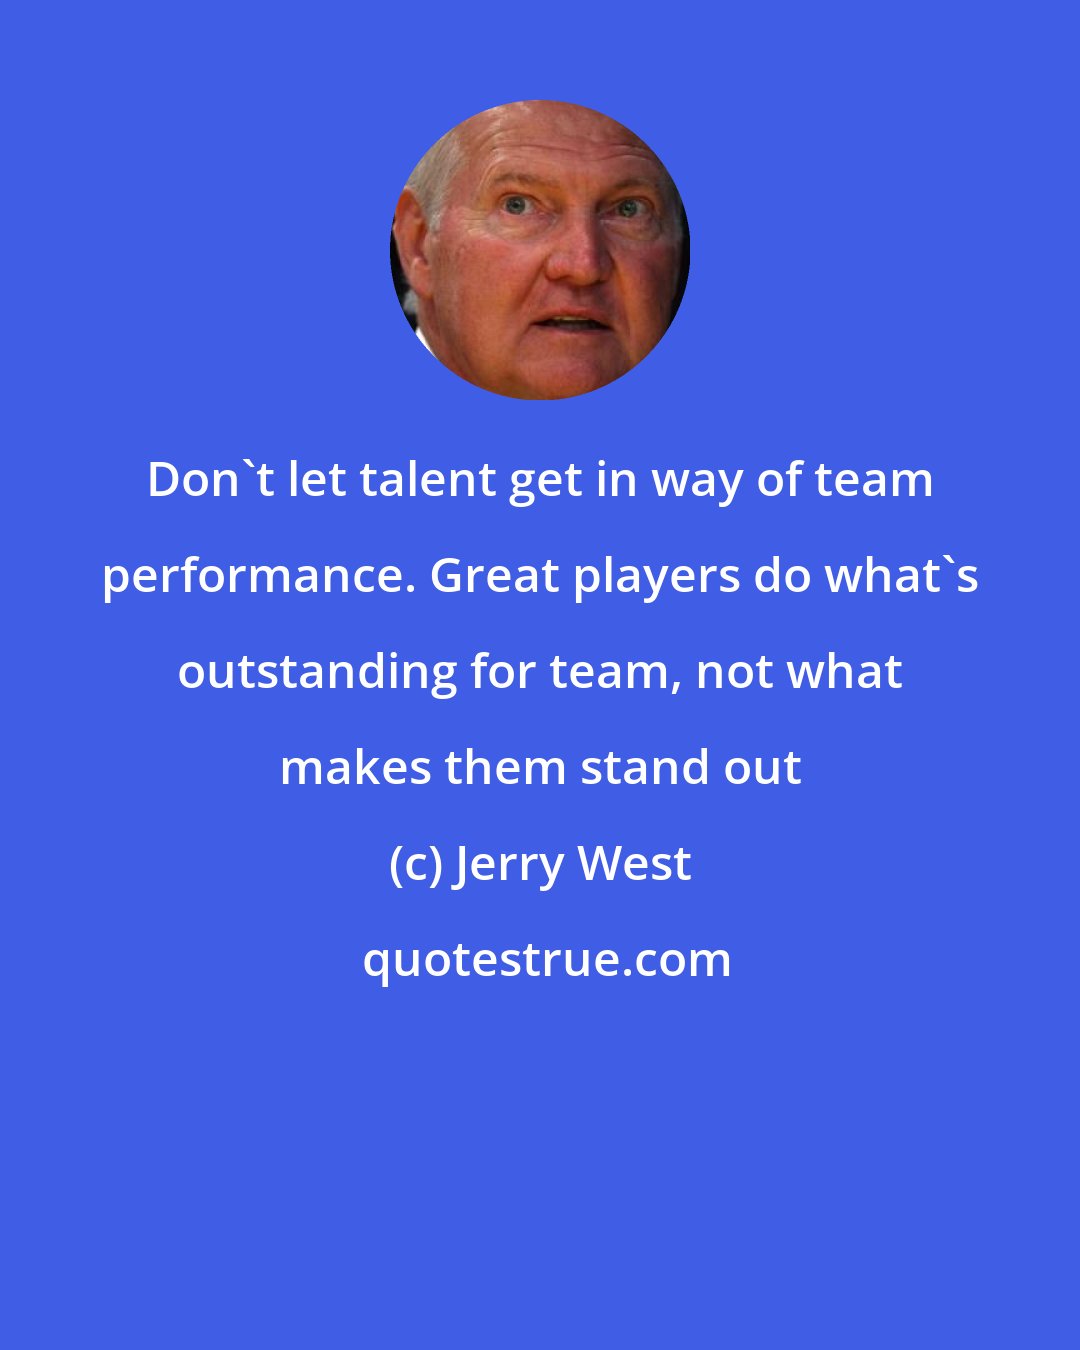 Jerry West: Don't let talent get in way of team performance. Great players do what's outstanding for team, not what makes them stand out